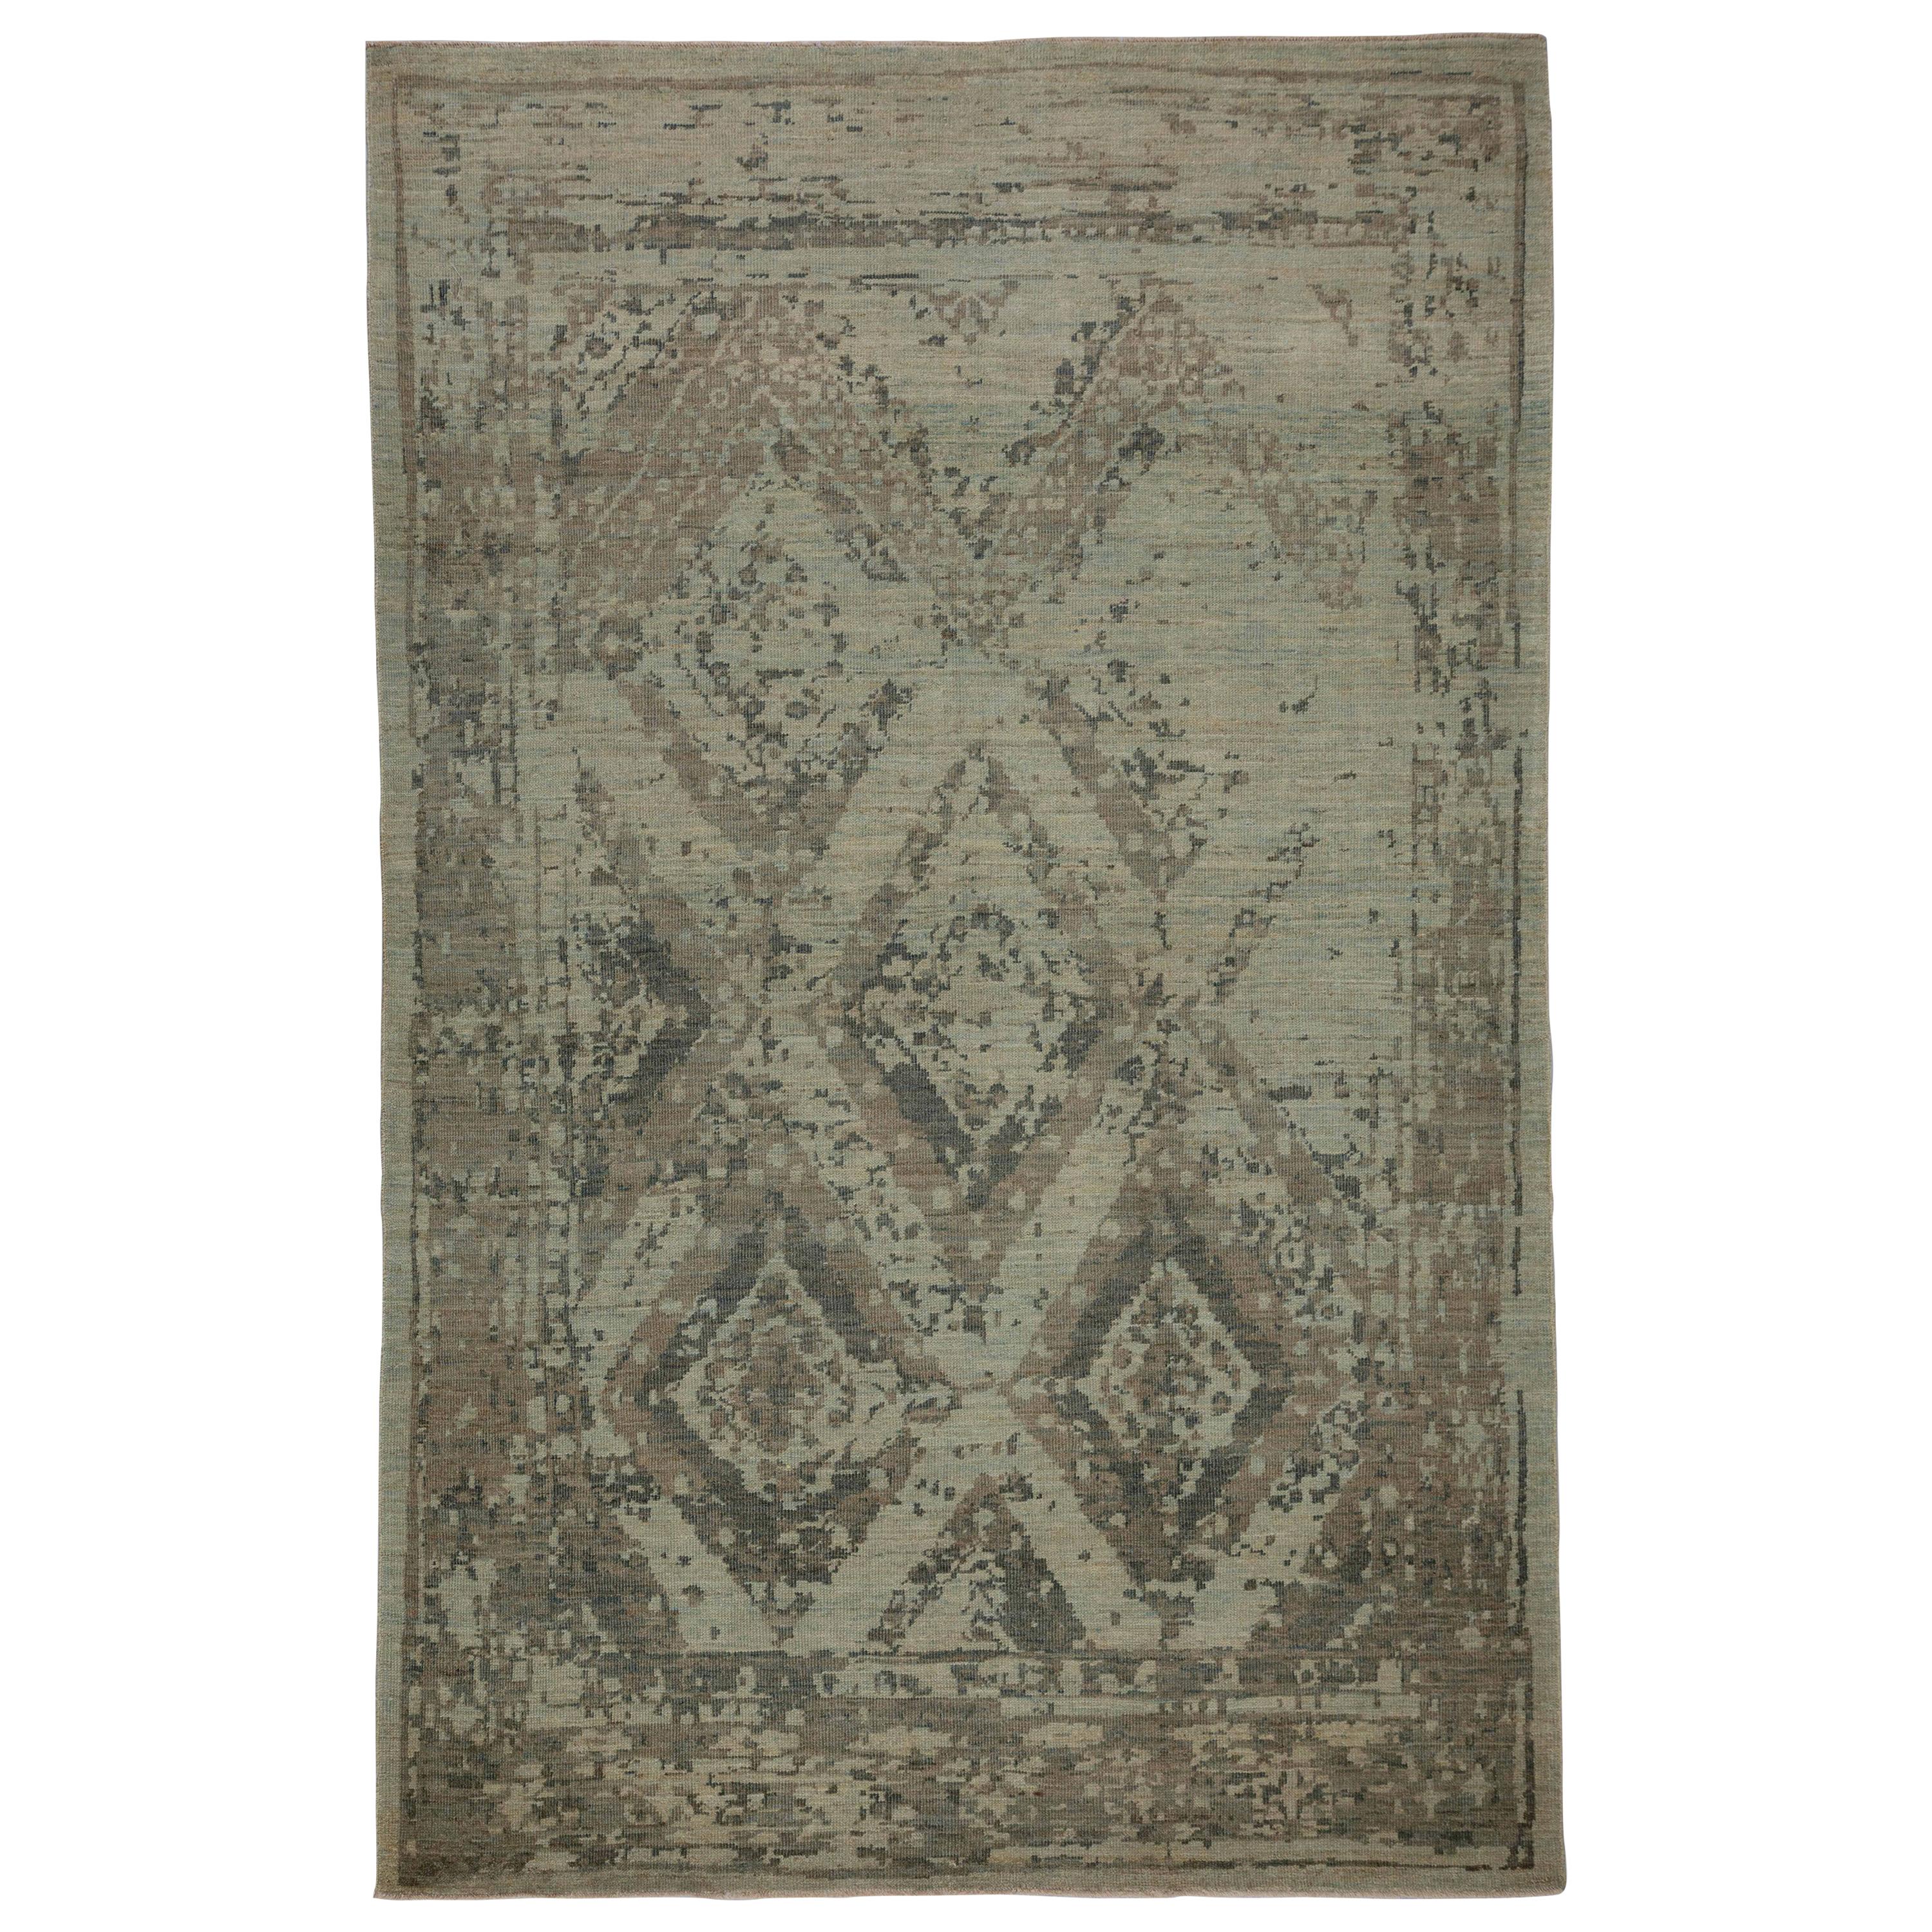 Modern Turkish Sultanabad Rug with Large Diamond Floral Details